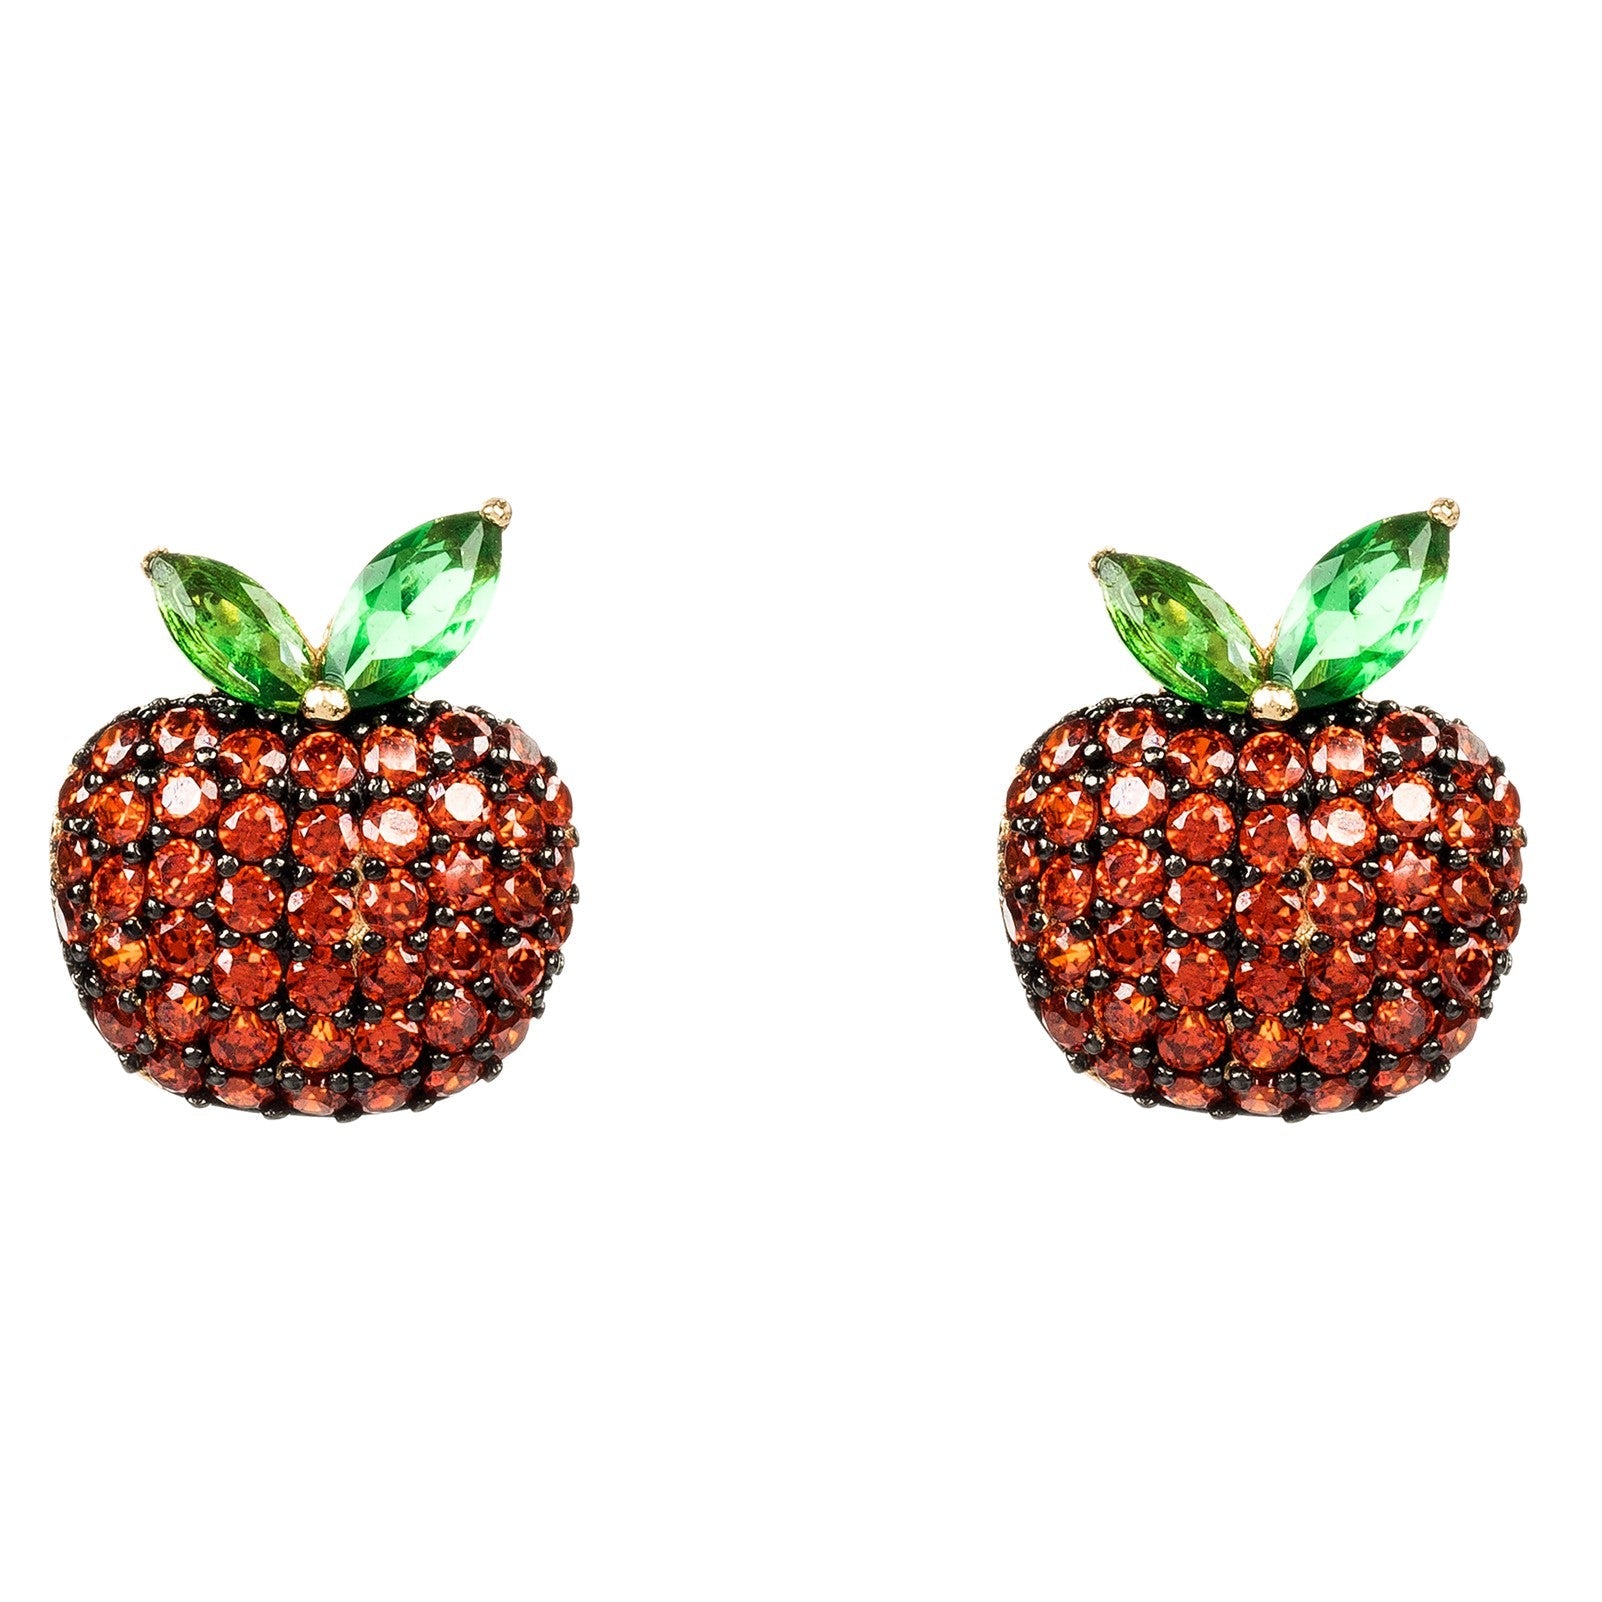 Our apple stud earrings featured on The Daily Telegraph - LATELITA